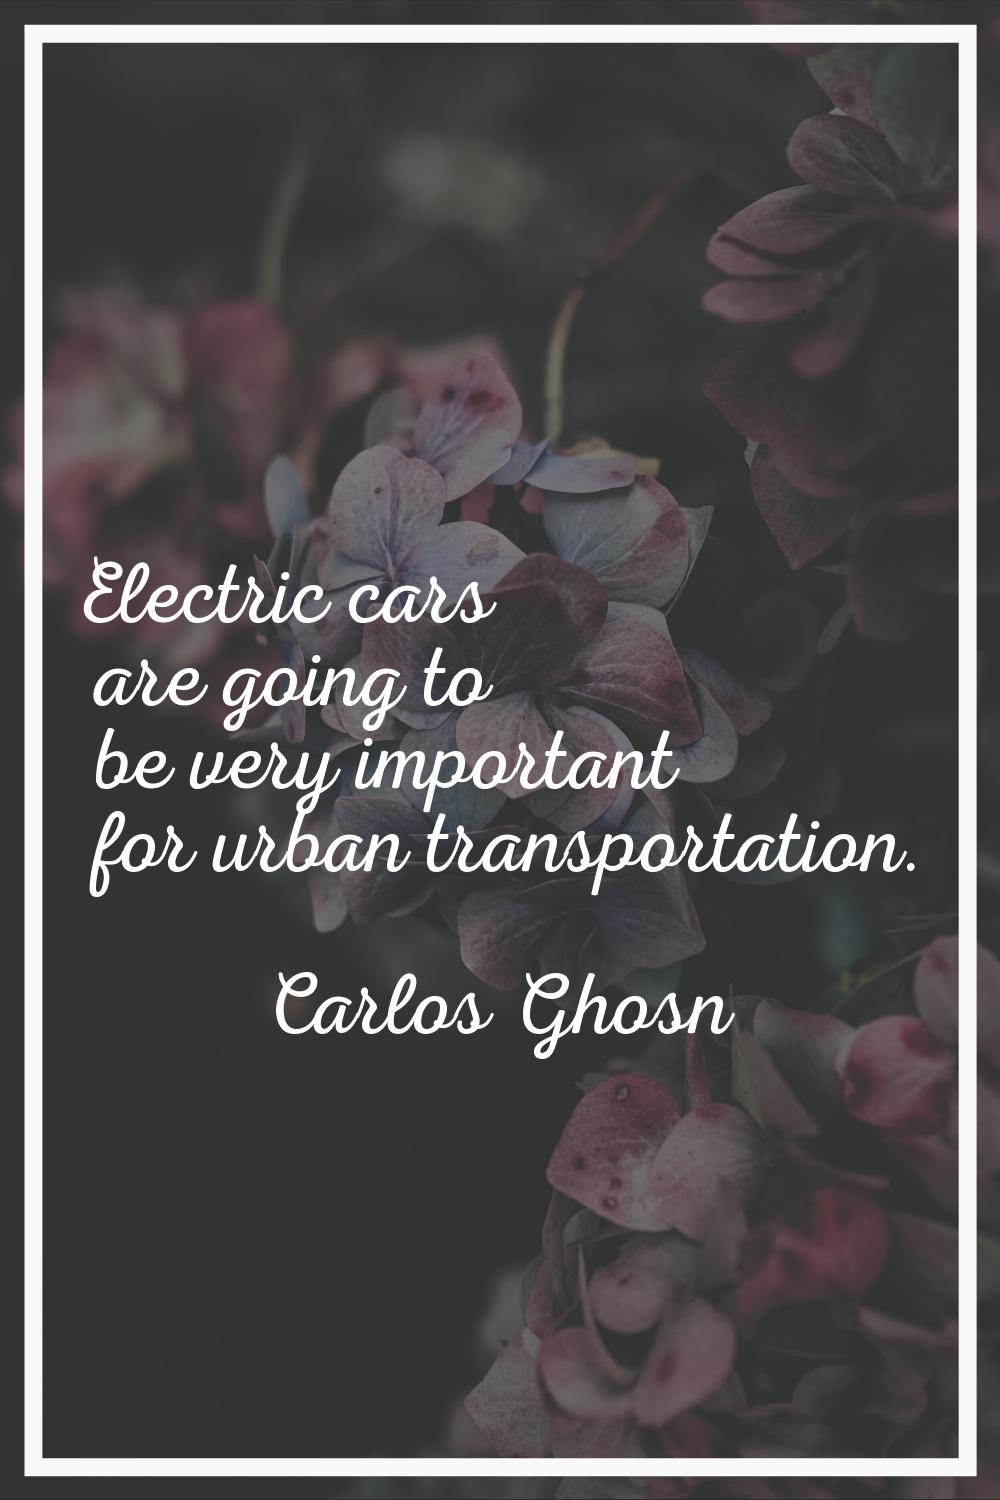 Electric cars are going to be very important for urban transportation.